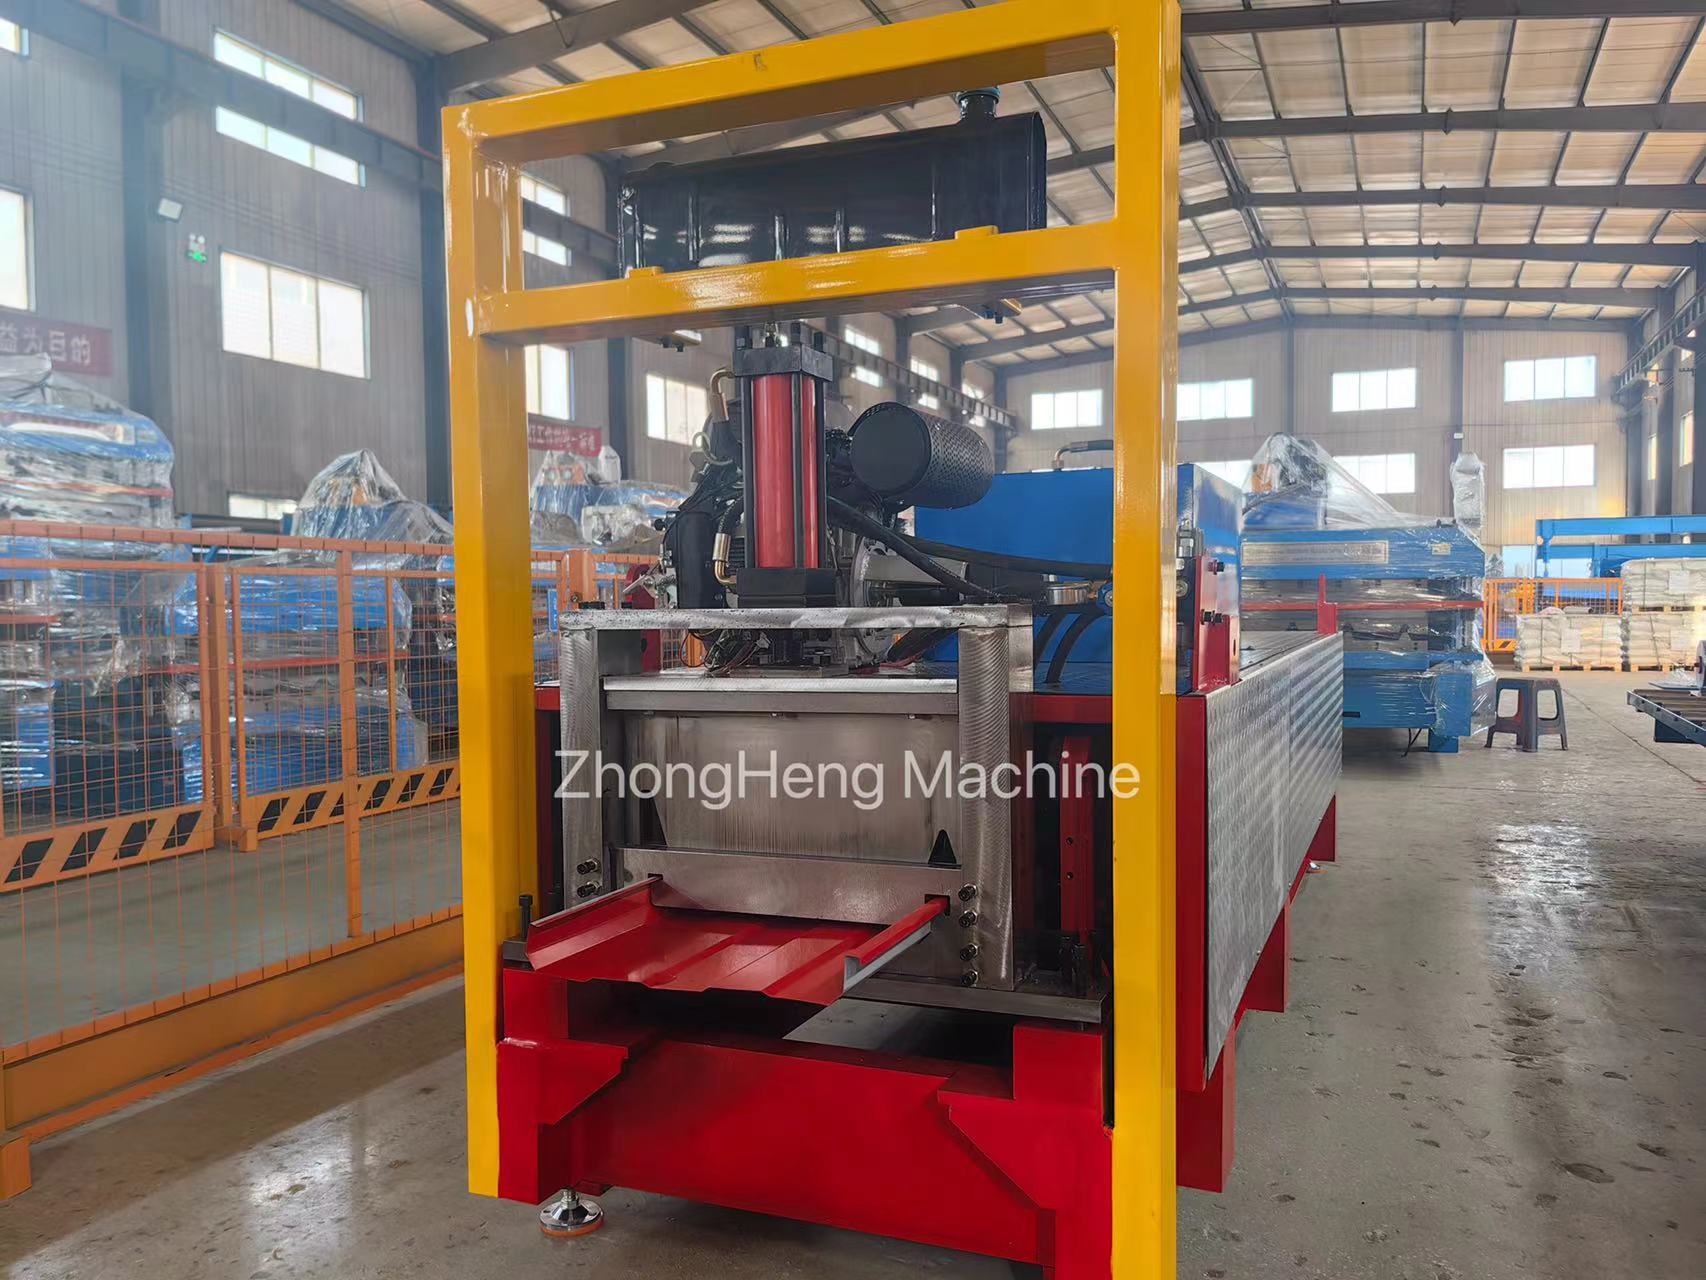 Mexico Portable Kr18 standing seam metal roofing machine, metal-roofing-machine